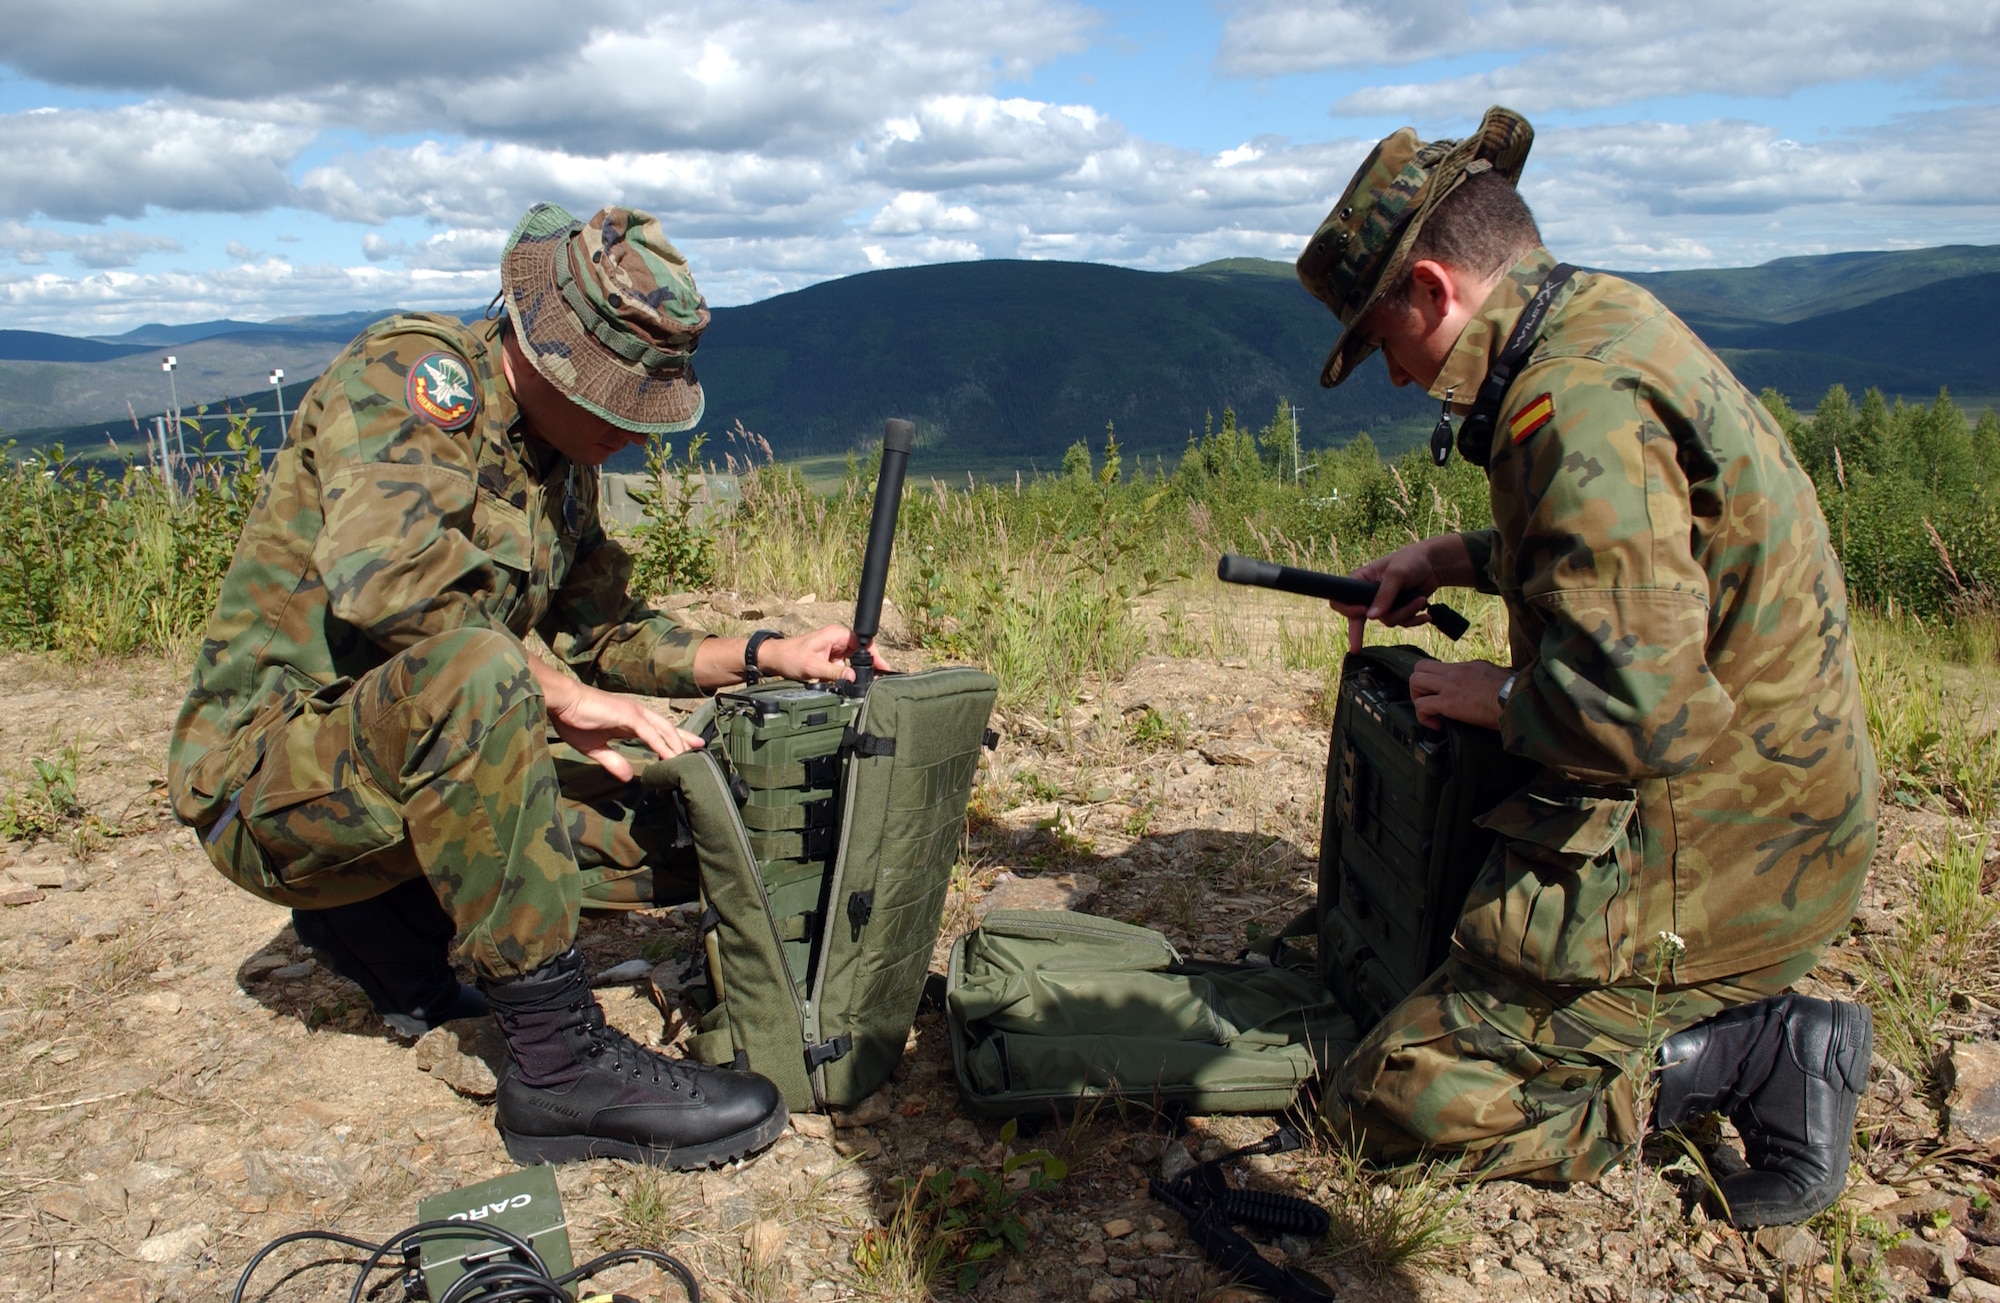 EIELSON AIR FORCE BASE, Alaska -- Airman 1st Class Diego Figuerua (Left) and Senior Airman Francisco Infiesta (Right), Spanish Air Force, Tactical Air Control Party, set up a PRC-117 multiband radio to communicate to the aircrafts on the Pacific Alaskan Range Complex on July 16 during Red Flag-Alaska 07-3. The PARC provides 67,000 square miles of airspace, one conventional bombing range and two tactical bombing ranges containing more than 400 different types of targets and more than 30 threat simulators which allows them to exchange tactics, techniques, and procedures and improve interoperability. (U.S. Air Force Photo by Airman 1st Class Jonathan Snyder) 